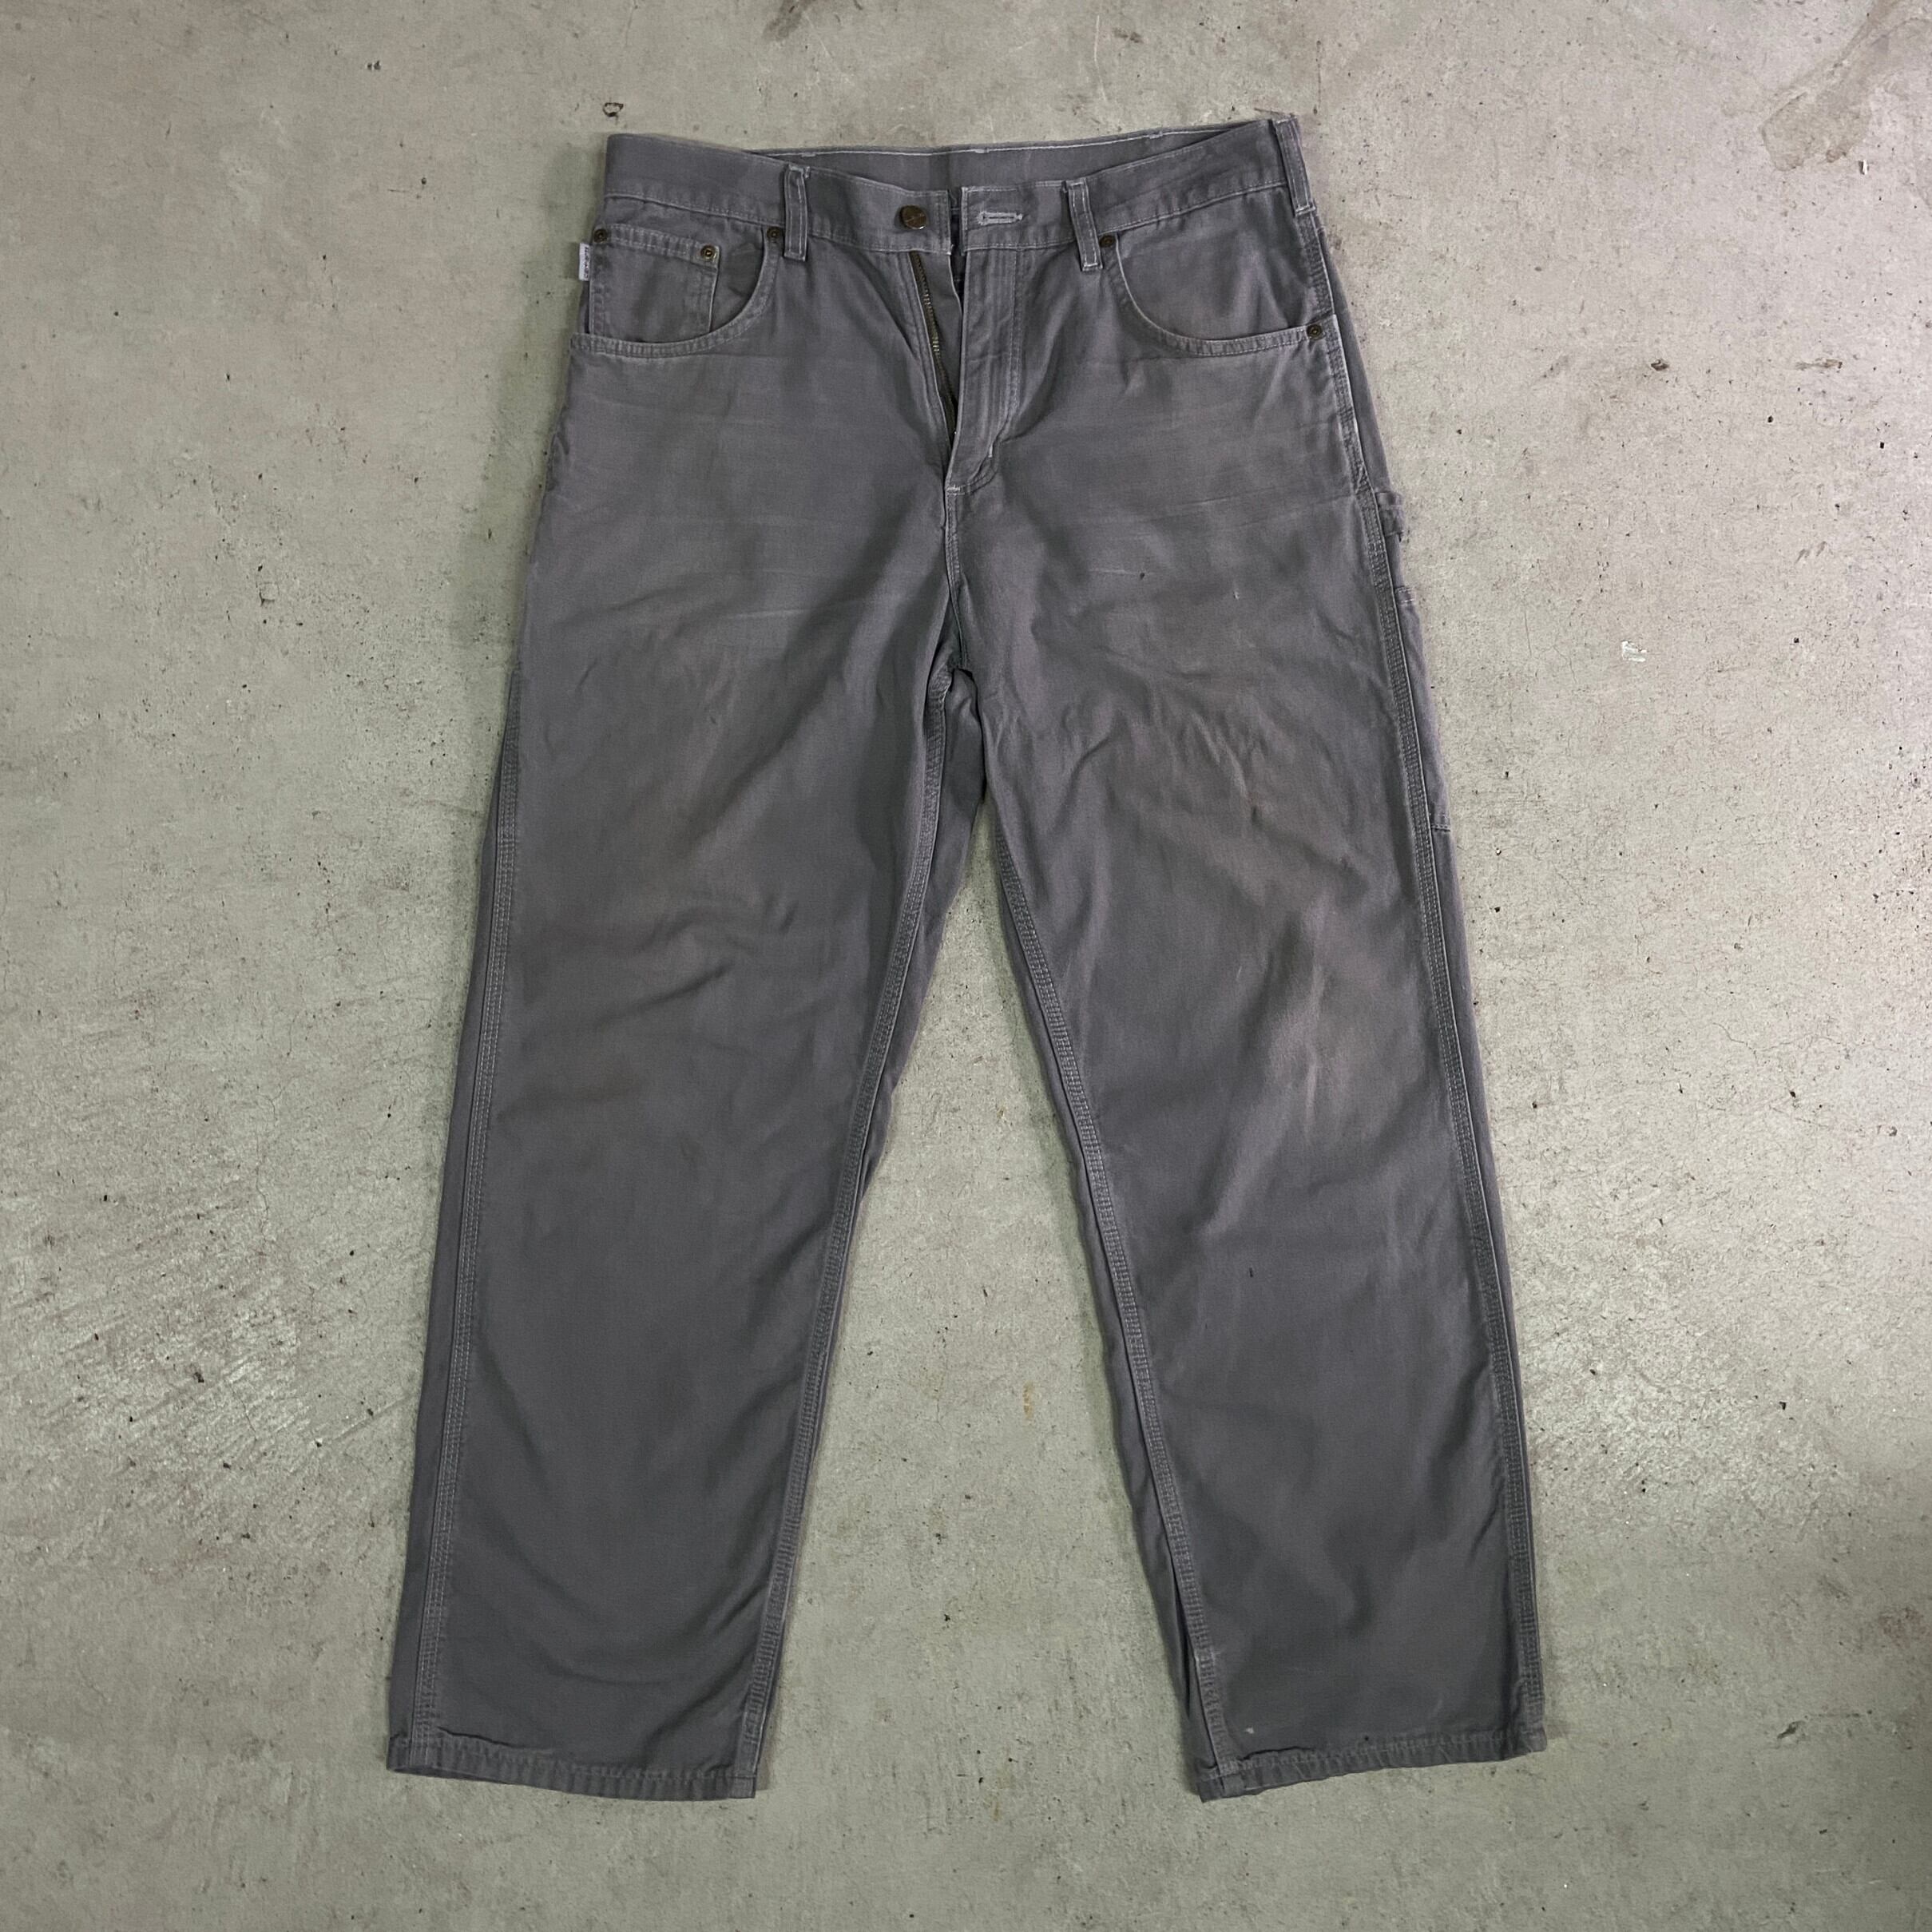 Carhartt カーハート Loose Fit ダック地 ワイド ペインター ワークパンツ メンズW34 古着 グレー ルーズフィット  薄手【ロングパンツ】【AN20】【PS2307P】 | cave 古着屋【公式】古着通販サイト powered by BASE